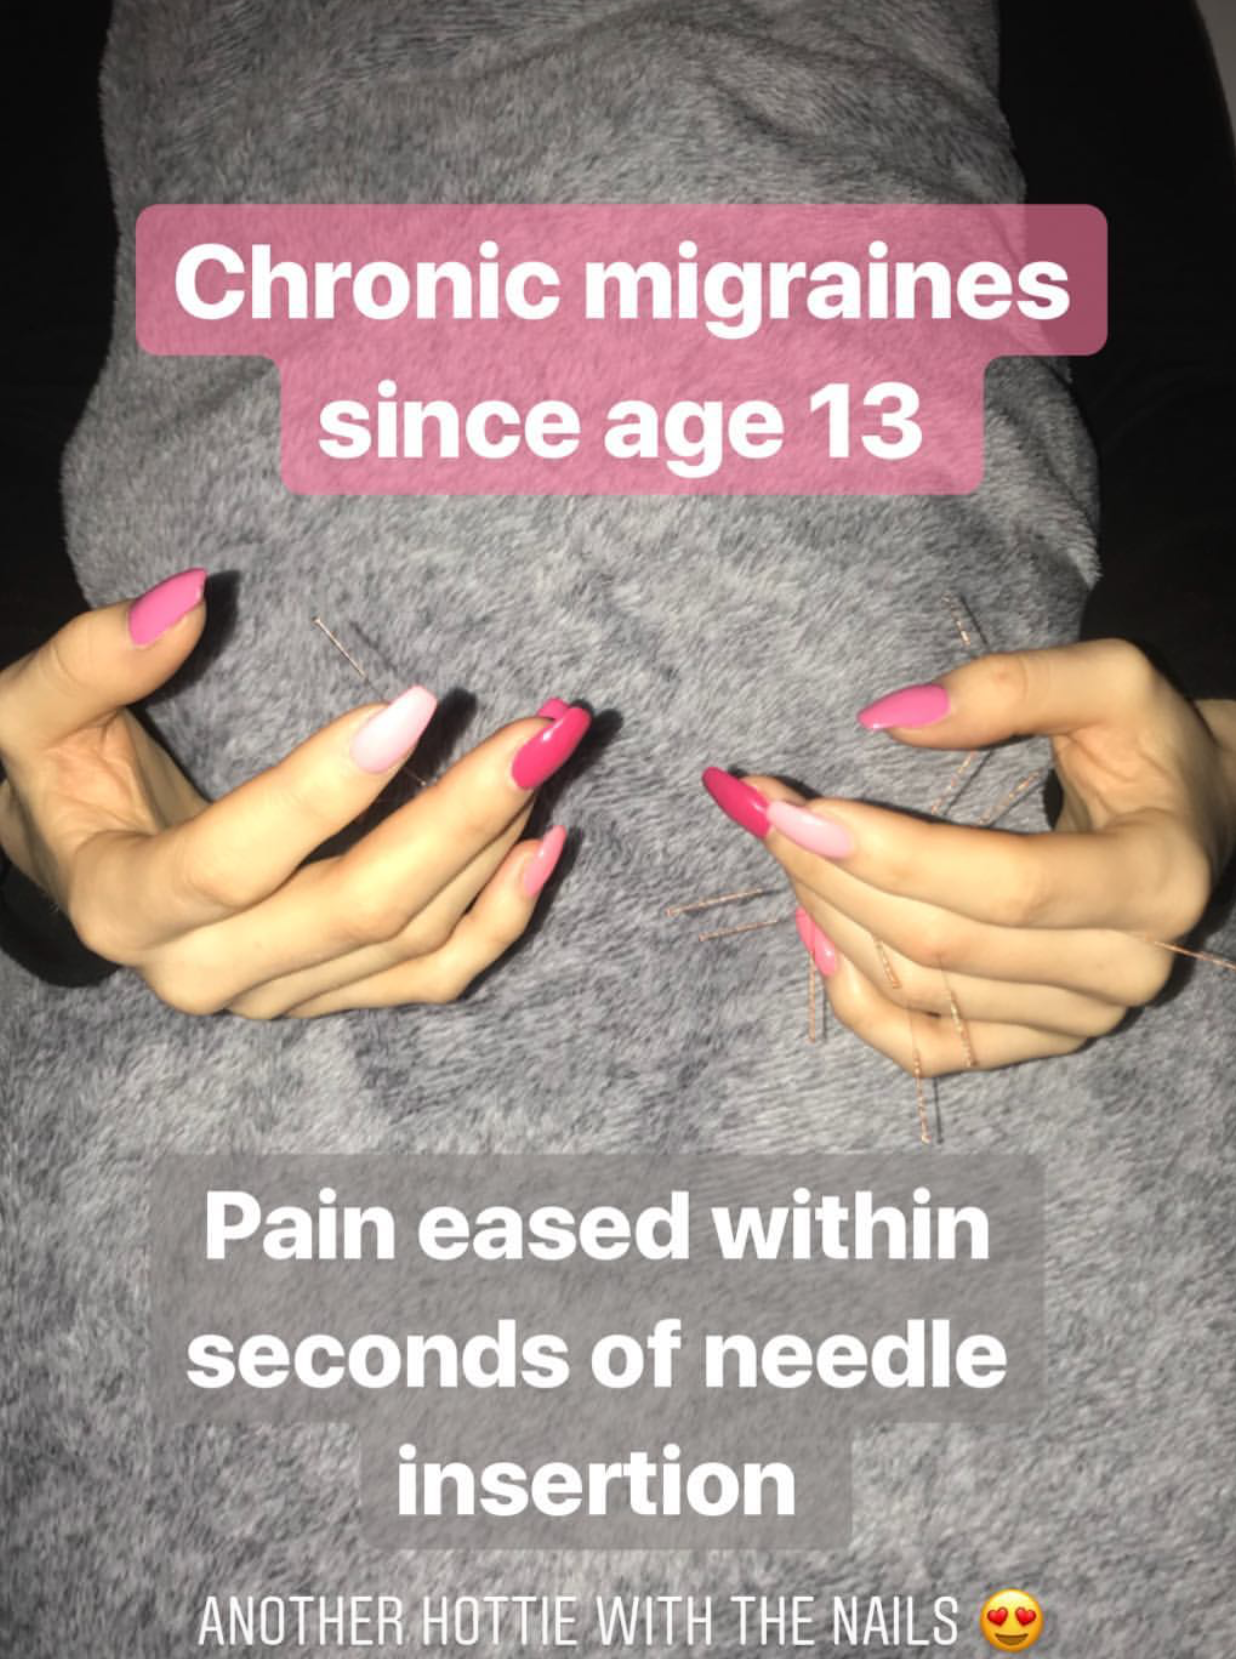  SuJok acupuncture treatment used for migraines on patient suffering from the condition since the age of 13. Treatment resulted in eased pain within seconds of needle insertion 